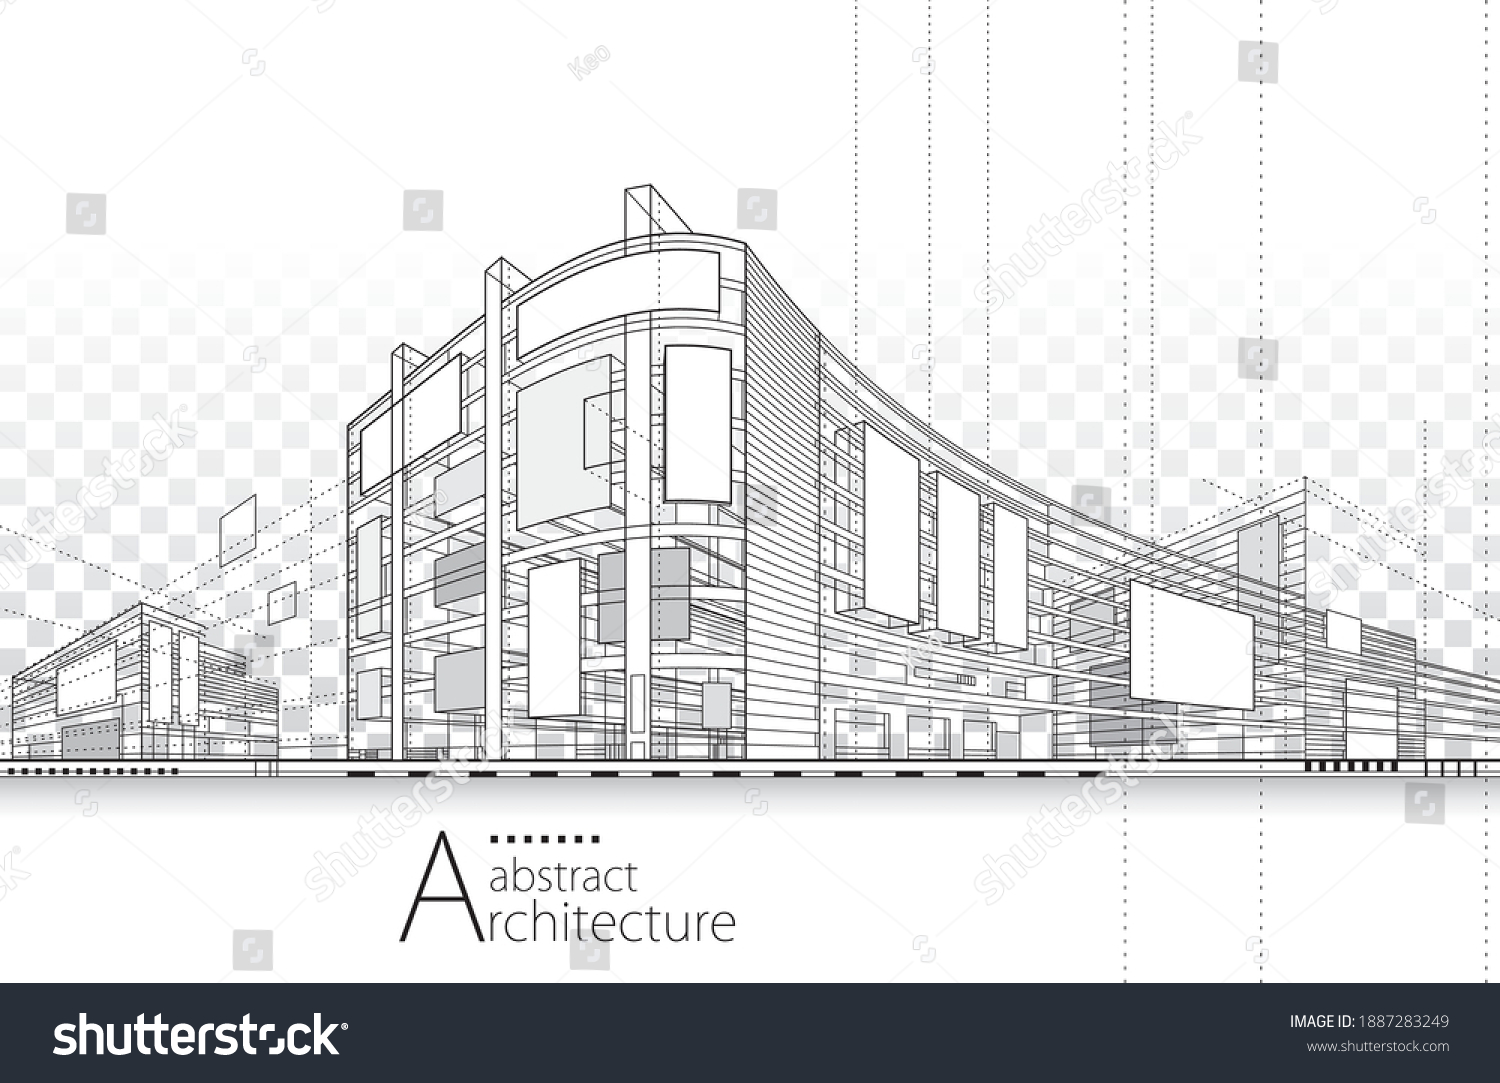 3D illustration architecture building construction perspective design, abstract modern urban building line drawing. #1887283249